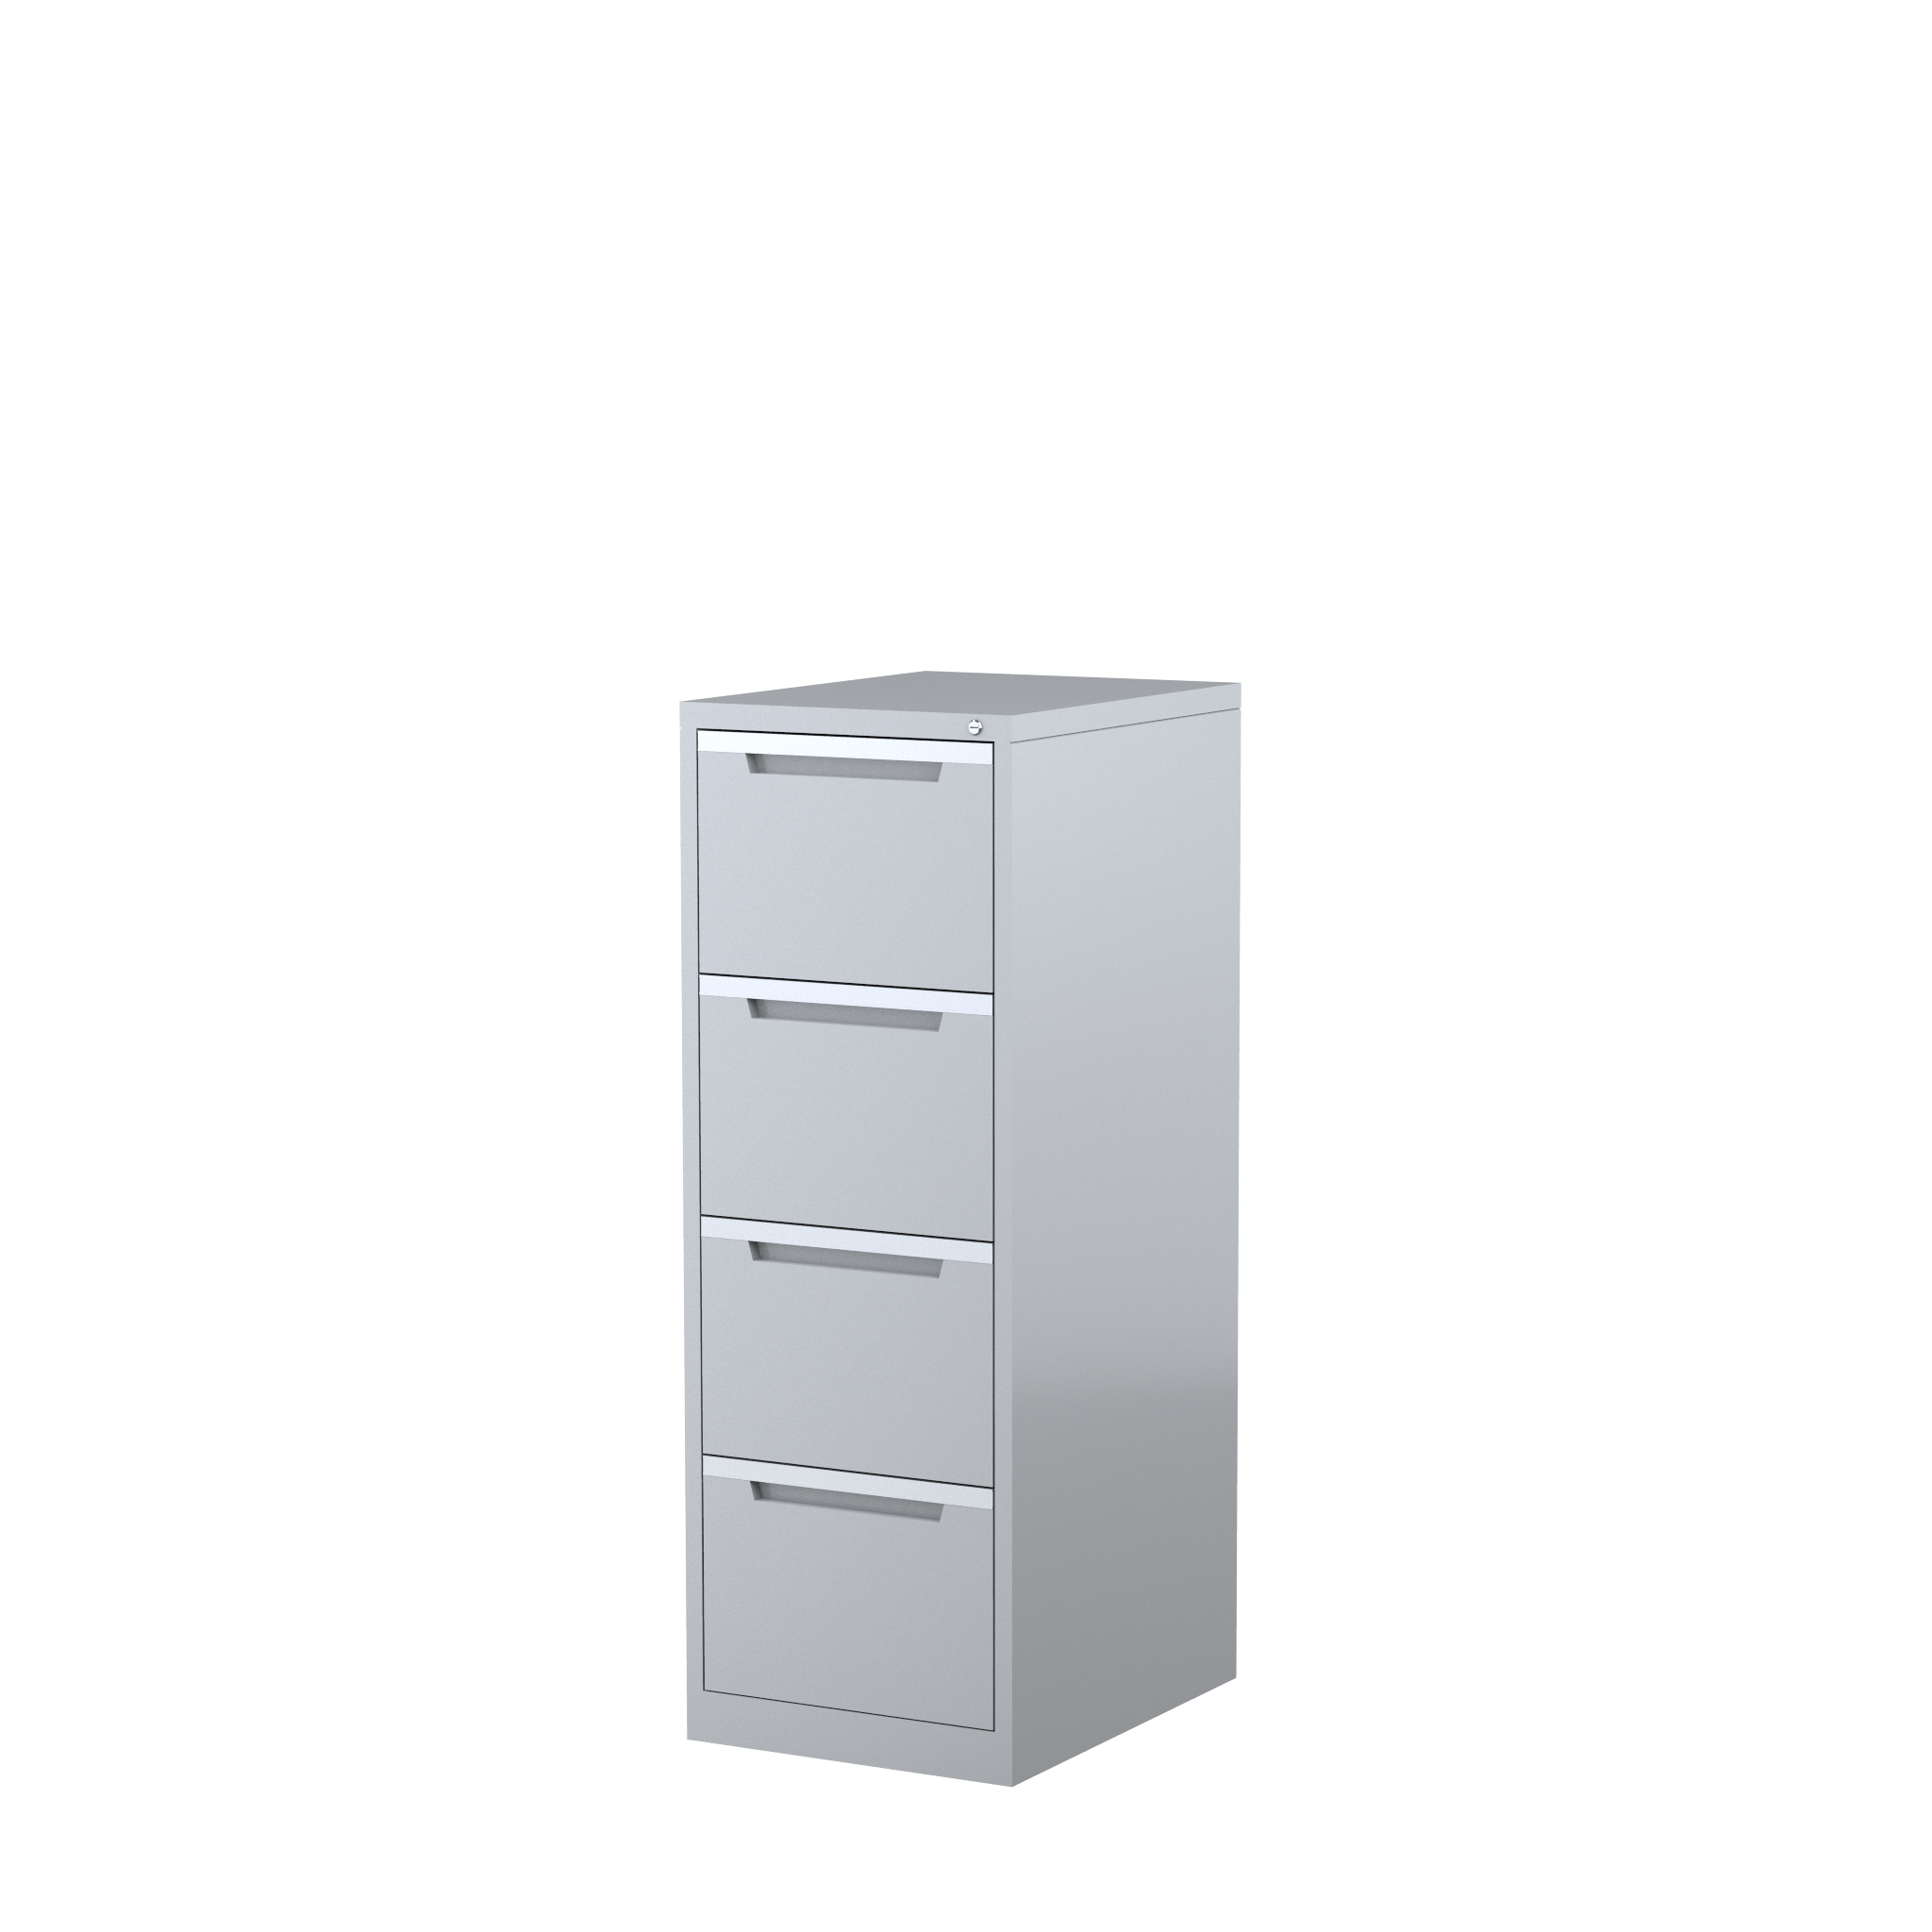 VF4 - STEELCO 4 Drawer VFC 1320H x 470W x 620D-SG.png